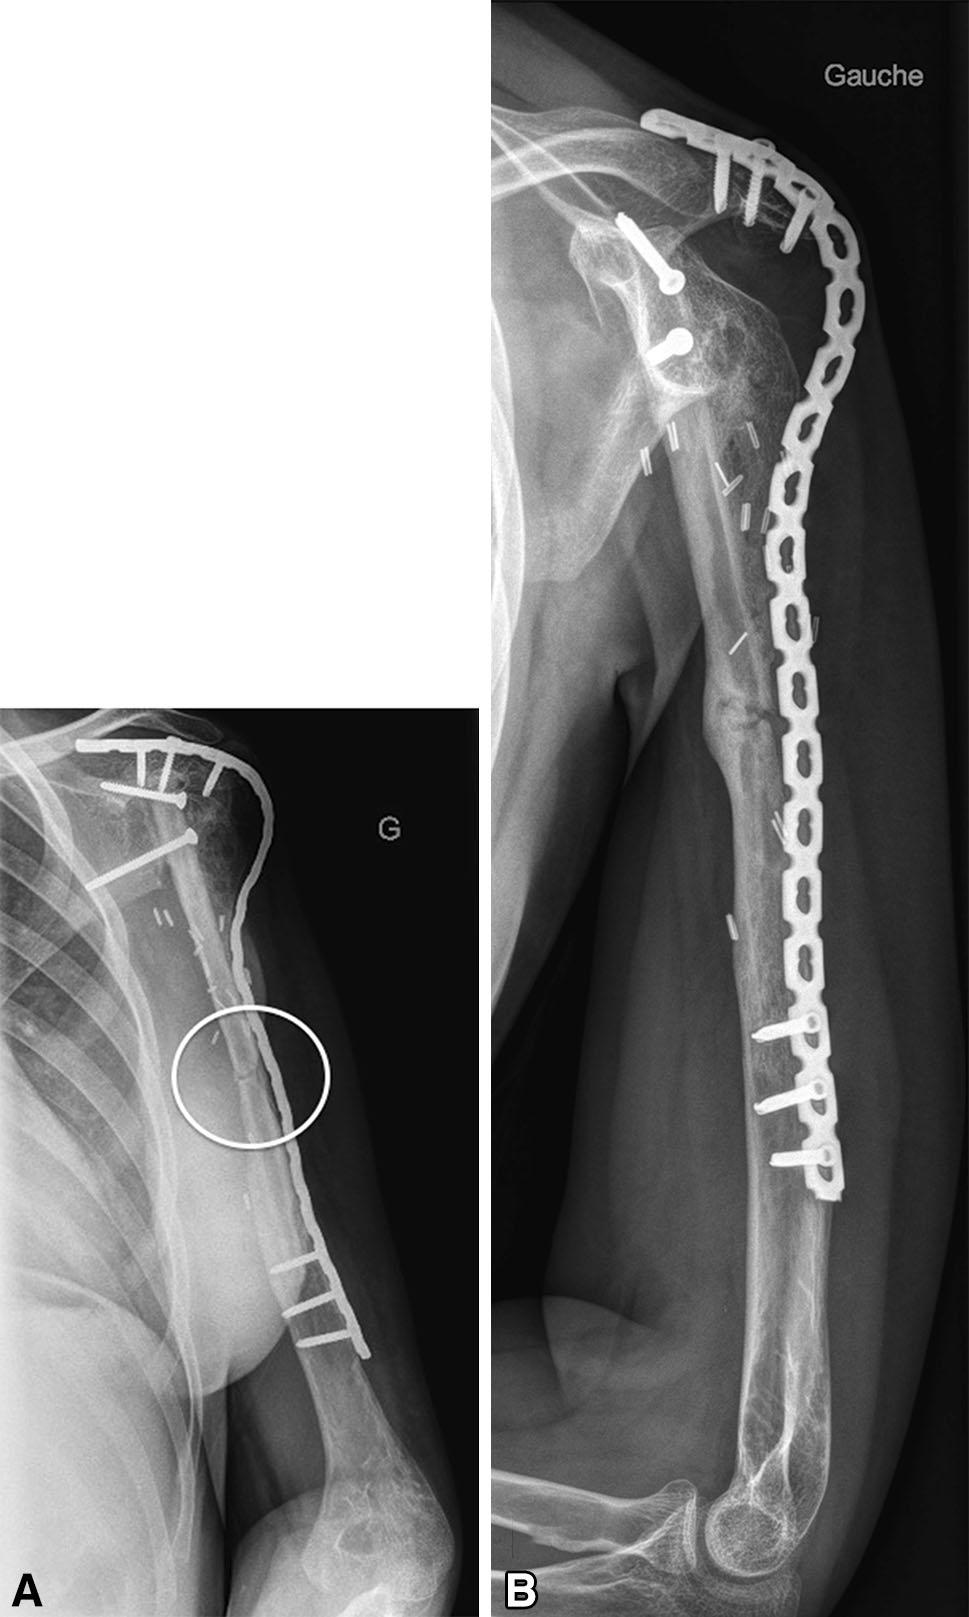 Volume 473, Number 6, June 2015 Induced-membrane Technique 2073 Fig. 5A B (A) An AP radiographic view obtained 2 months after the second-stage surgery shows a fracture of the fibula (Patient 6).